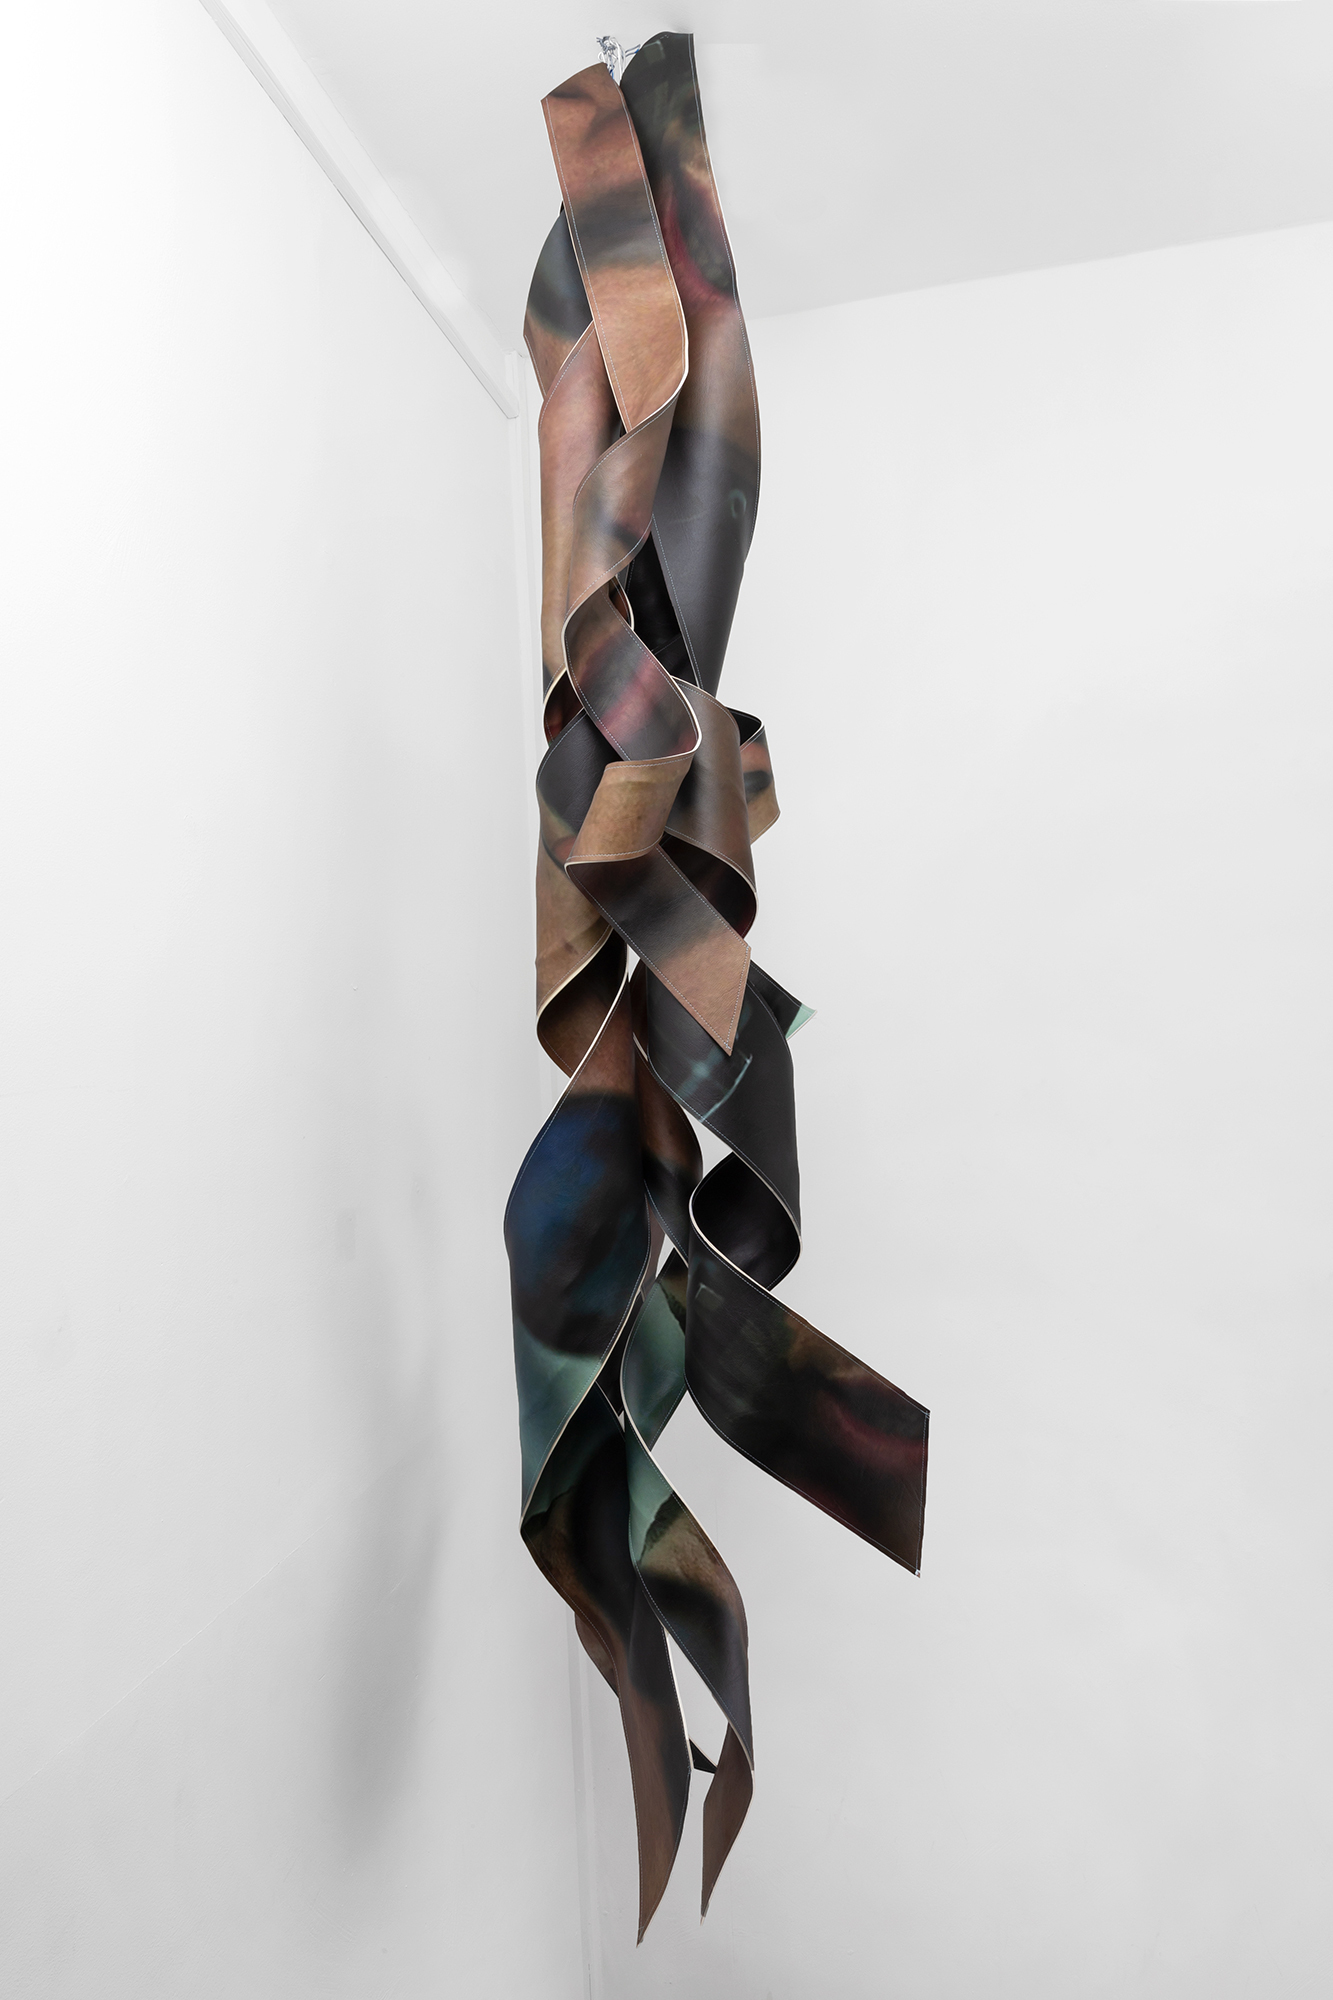 Kate Mackeson, Employee of the month, 2023,digital printed imitation leather, 177 x 40 x 30 cm